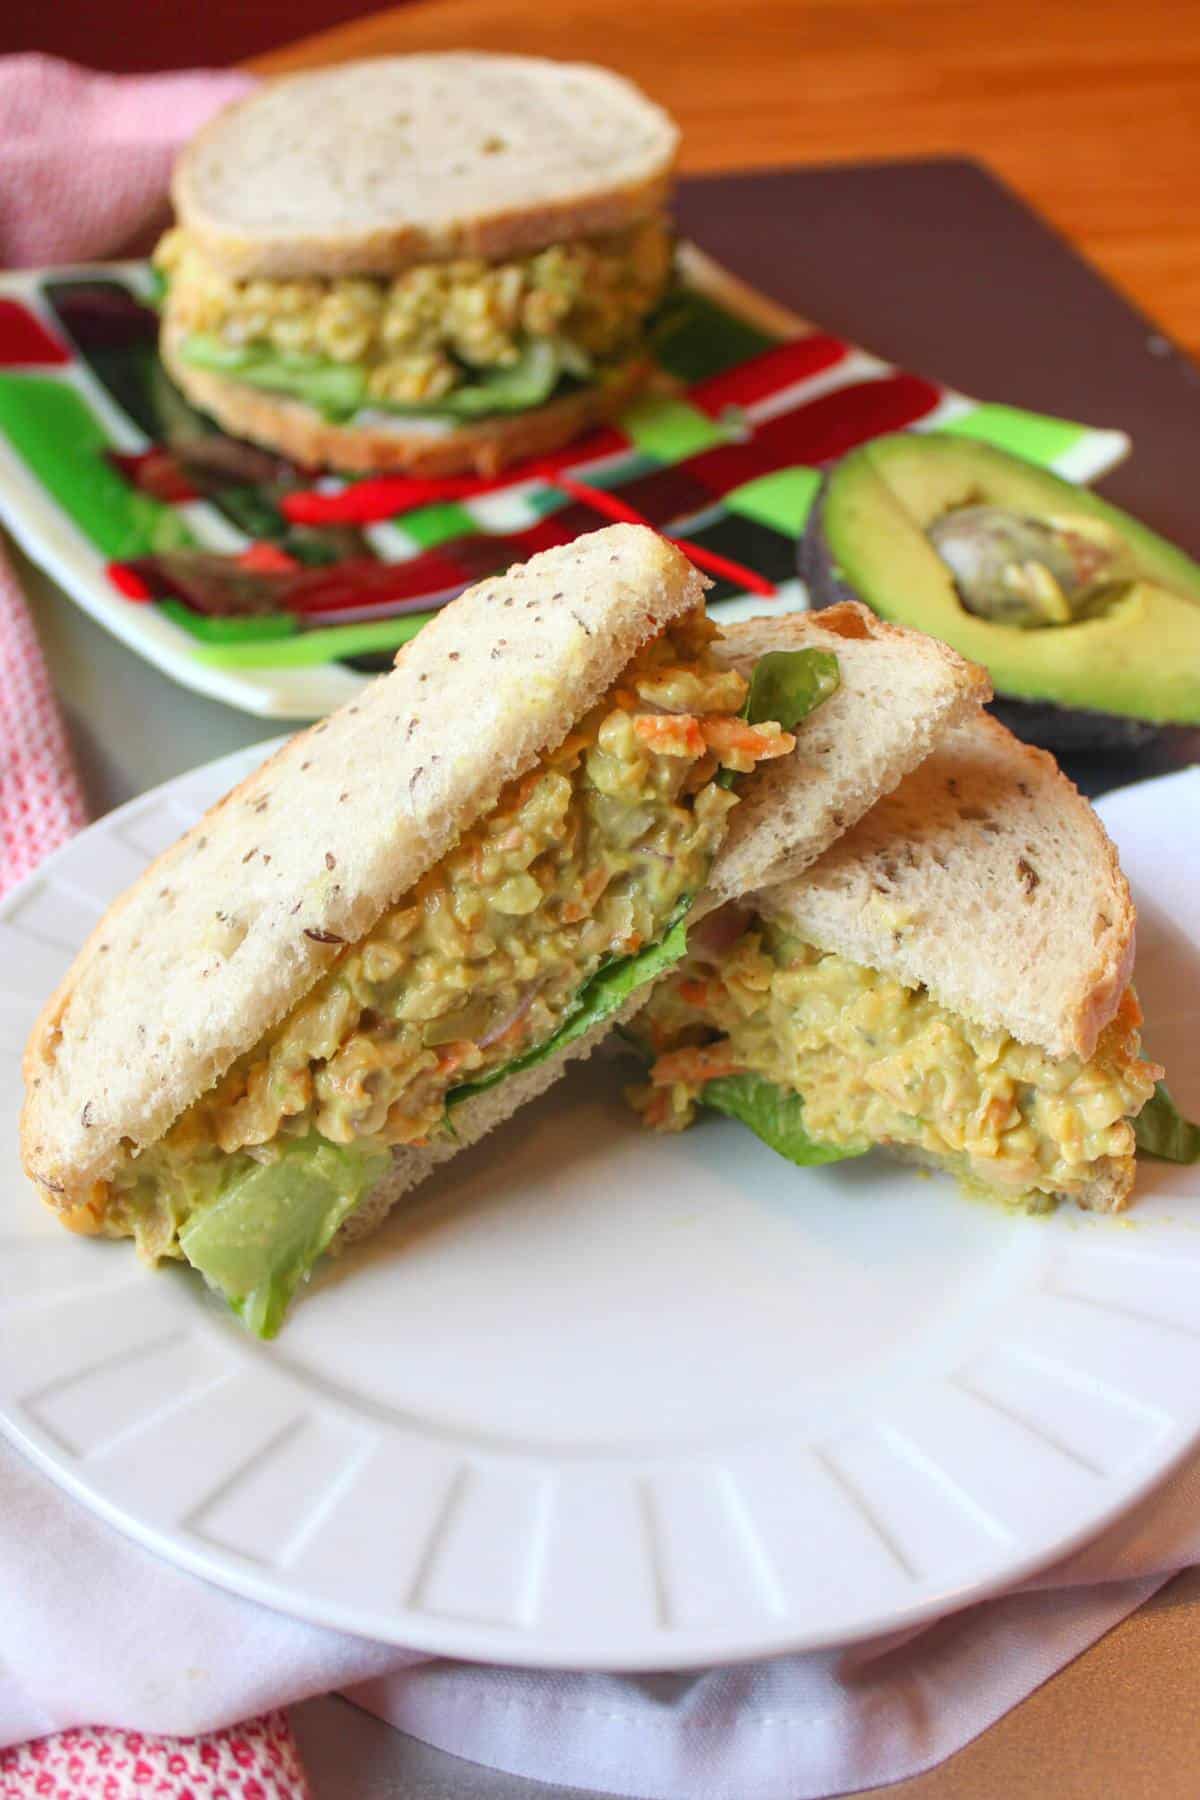 Chickpea salad sandwich, cut in half, on a white plate.